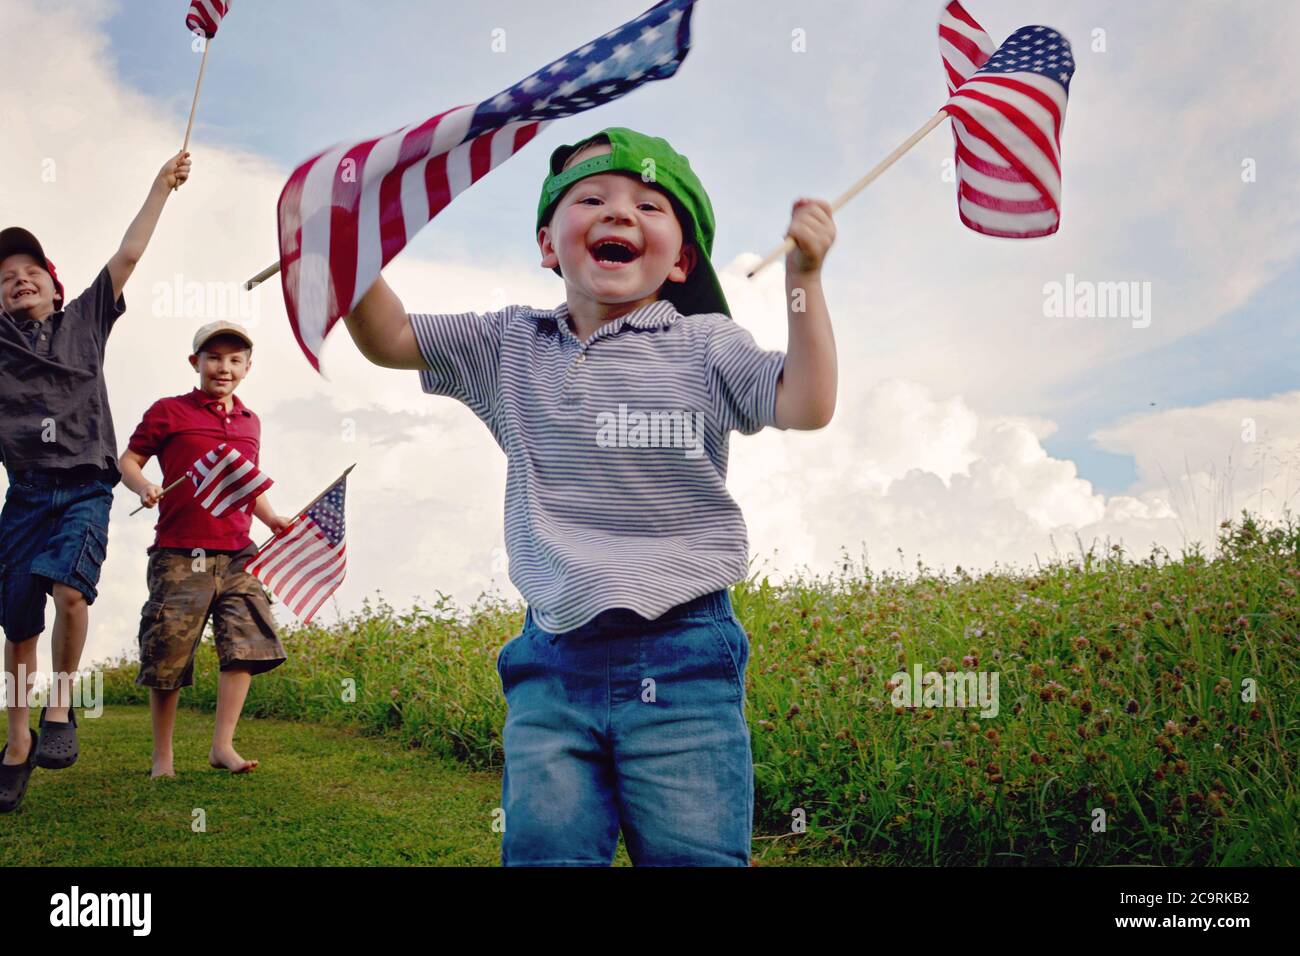 Three boys holding American Flags enthusiastically while waving them and the youngest boy in front is the happiest of all with the biggest smile Stock Photo